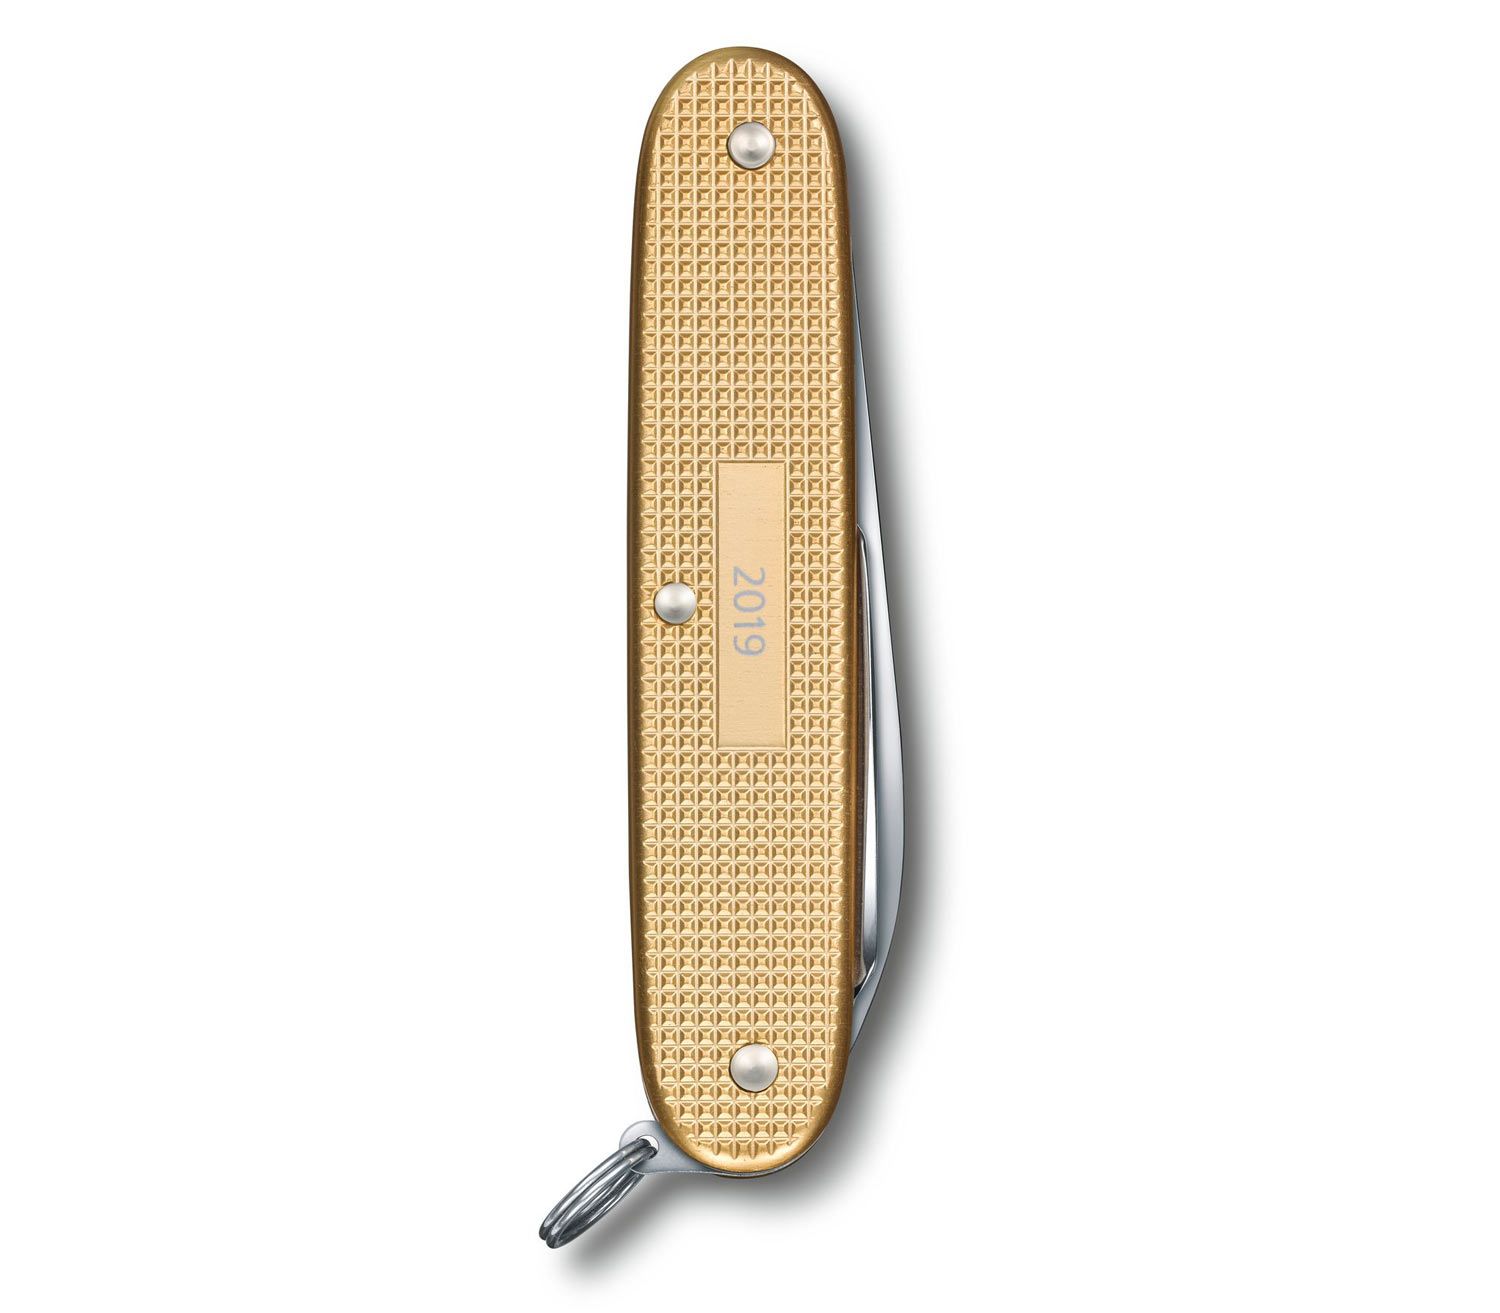 93 GUANCE ALOX CHAMPAGNE GOLD LIMITED 0.8201.L19 VICTORINOX MULTIUSO PIONEER MM 